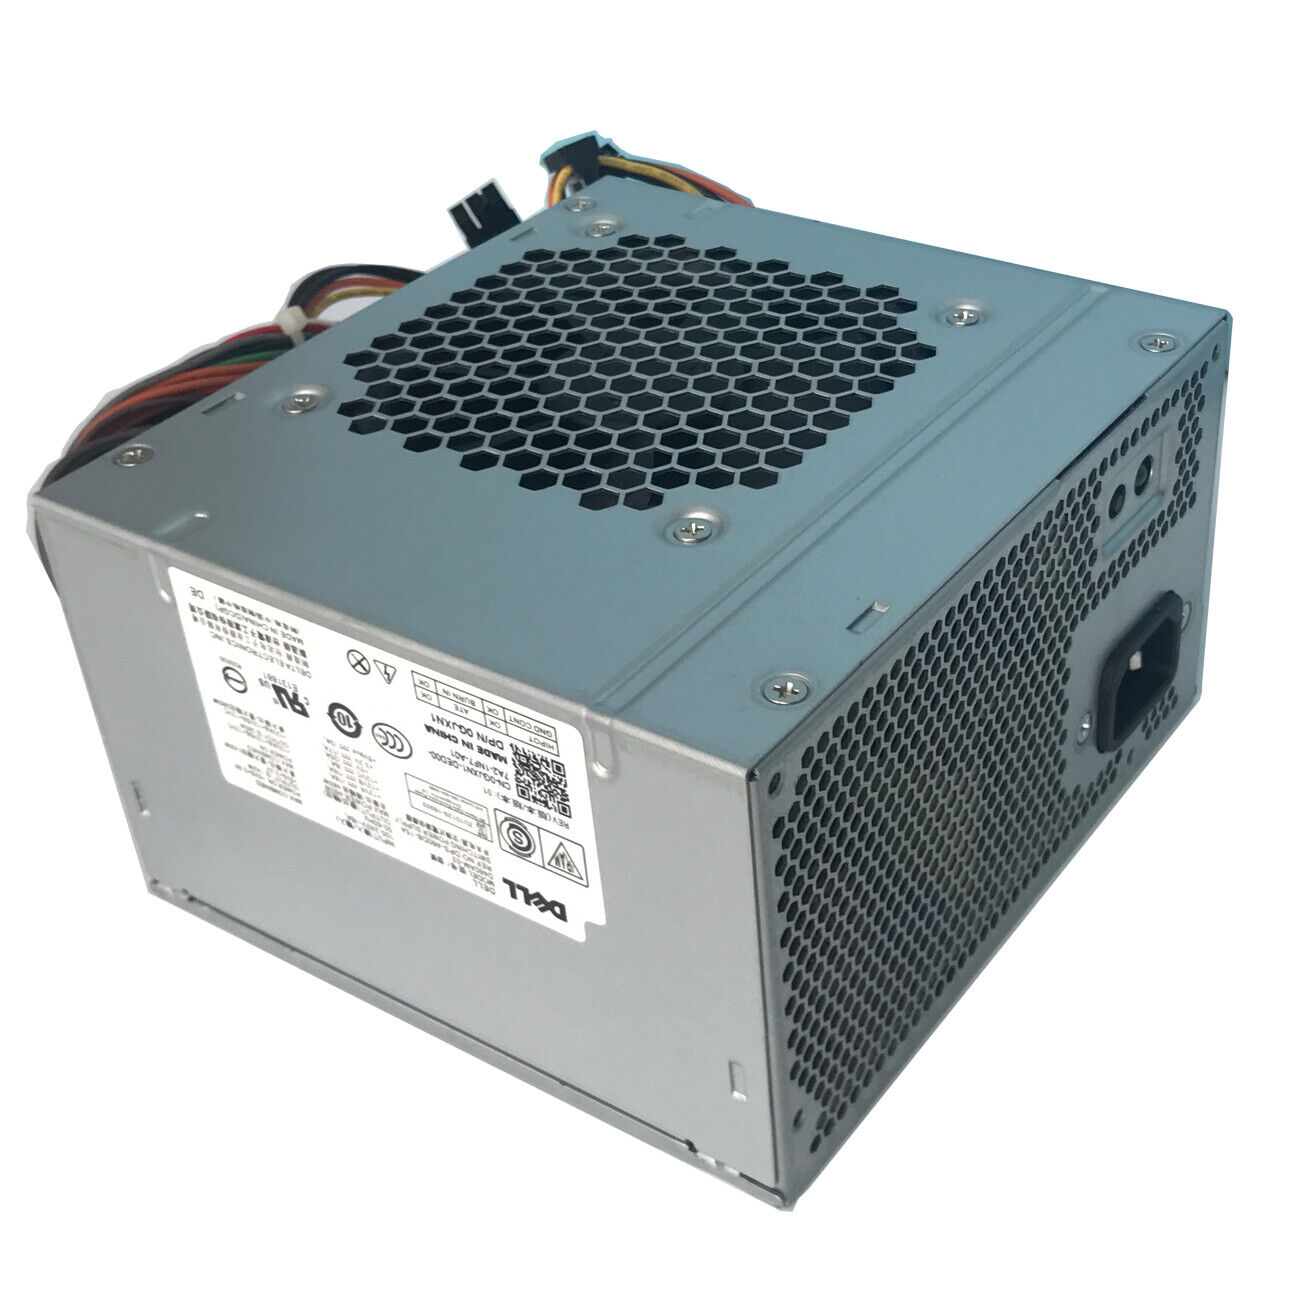 For DELL XPS 8910 8920 8300 8900 8700 8500 R5 D460AM-03 PSU Power Supply 460W US